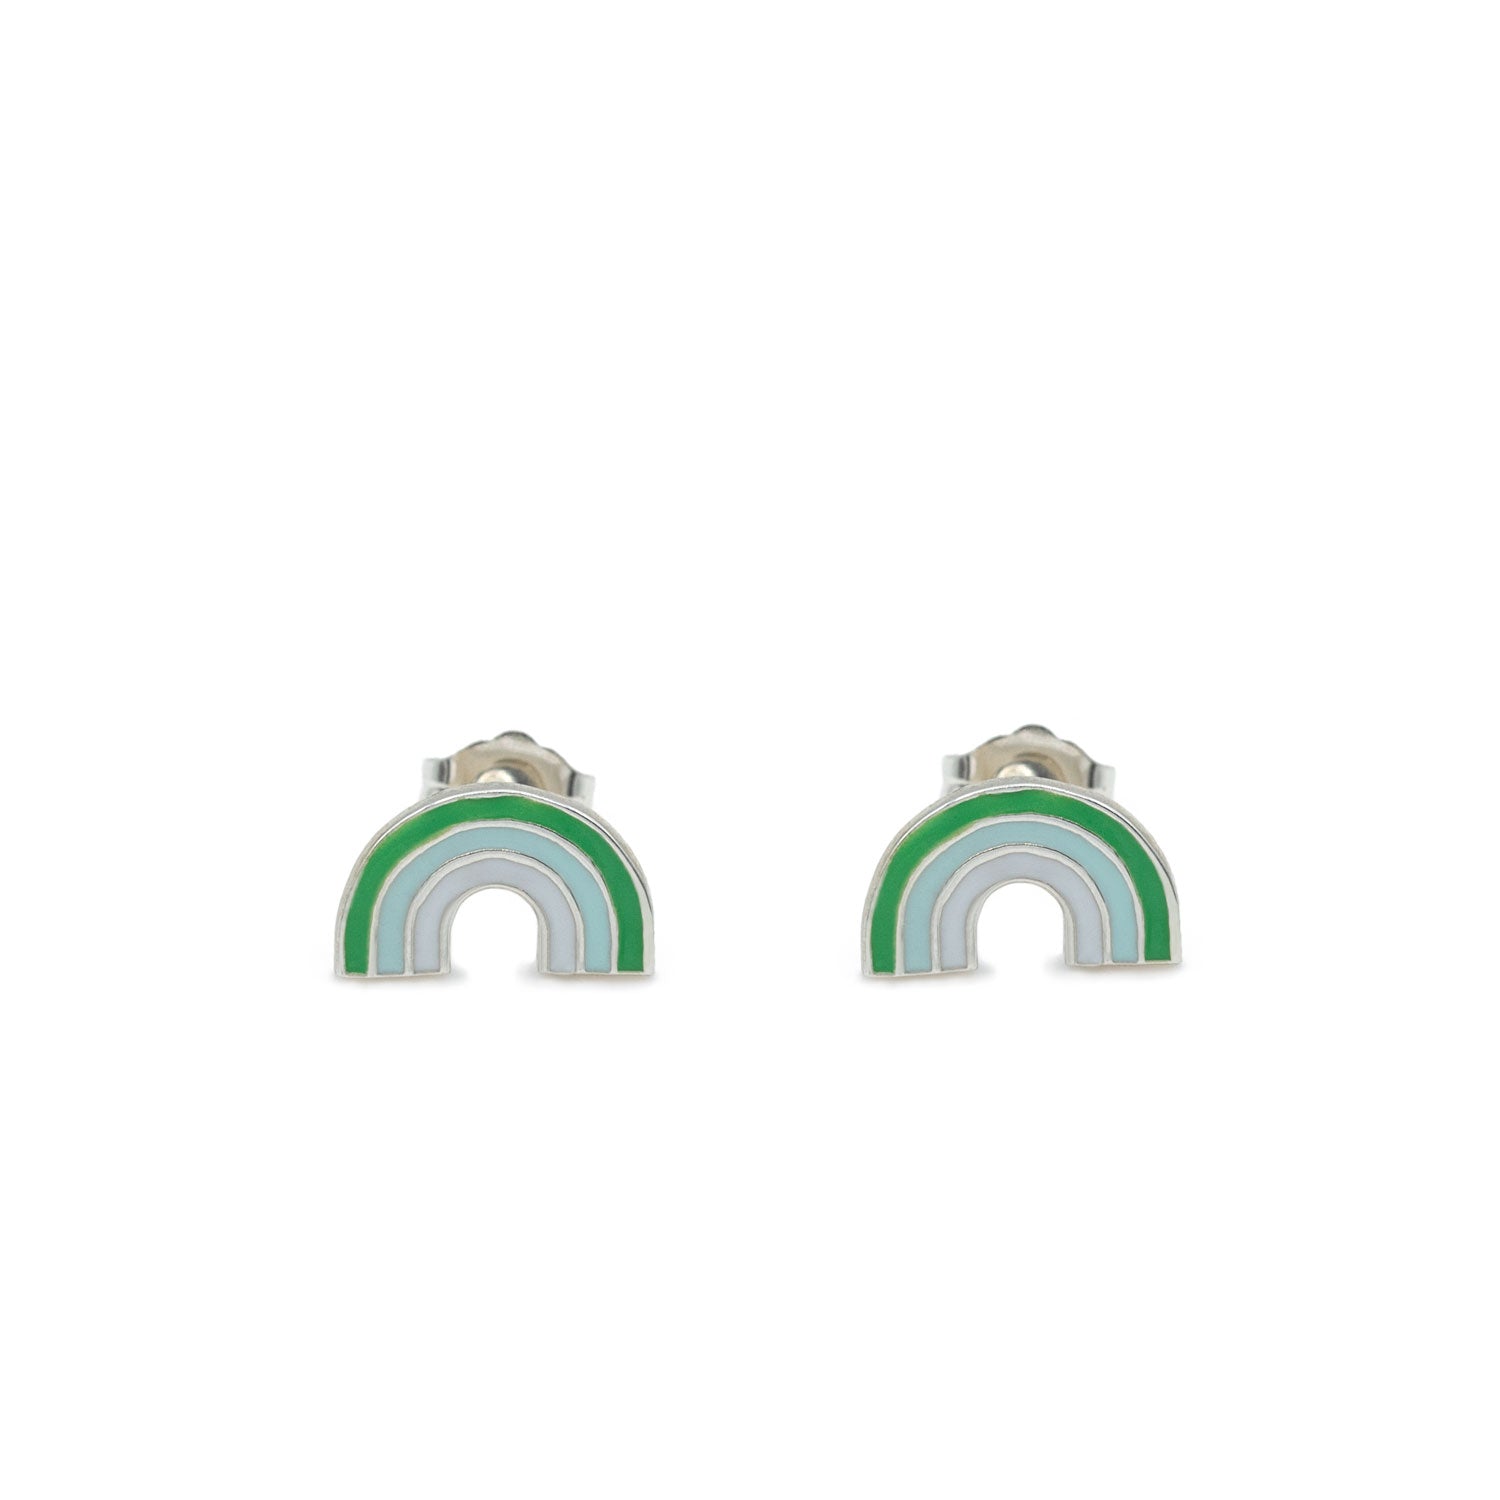 rainbow studs in 925 sterling silver with grass and mint green enamel